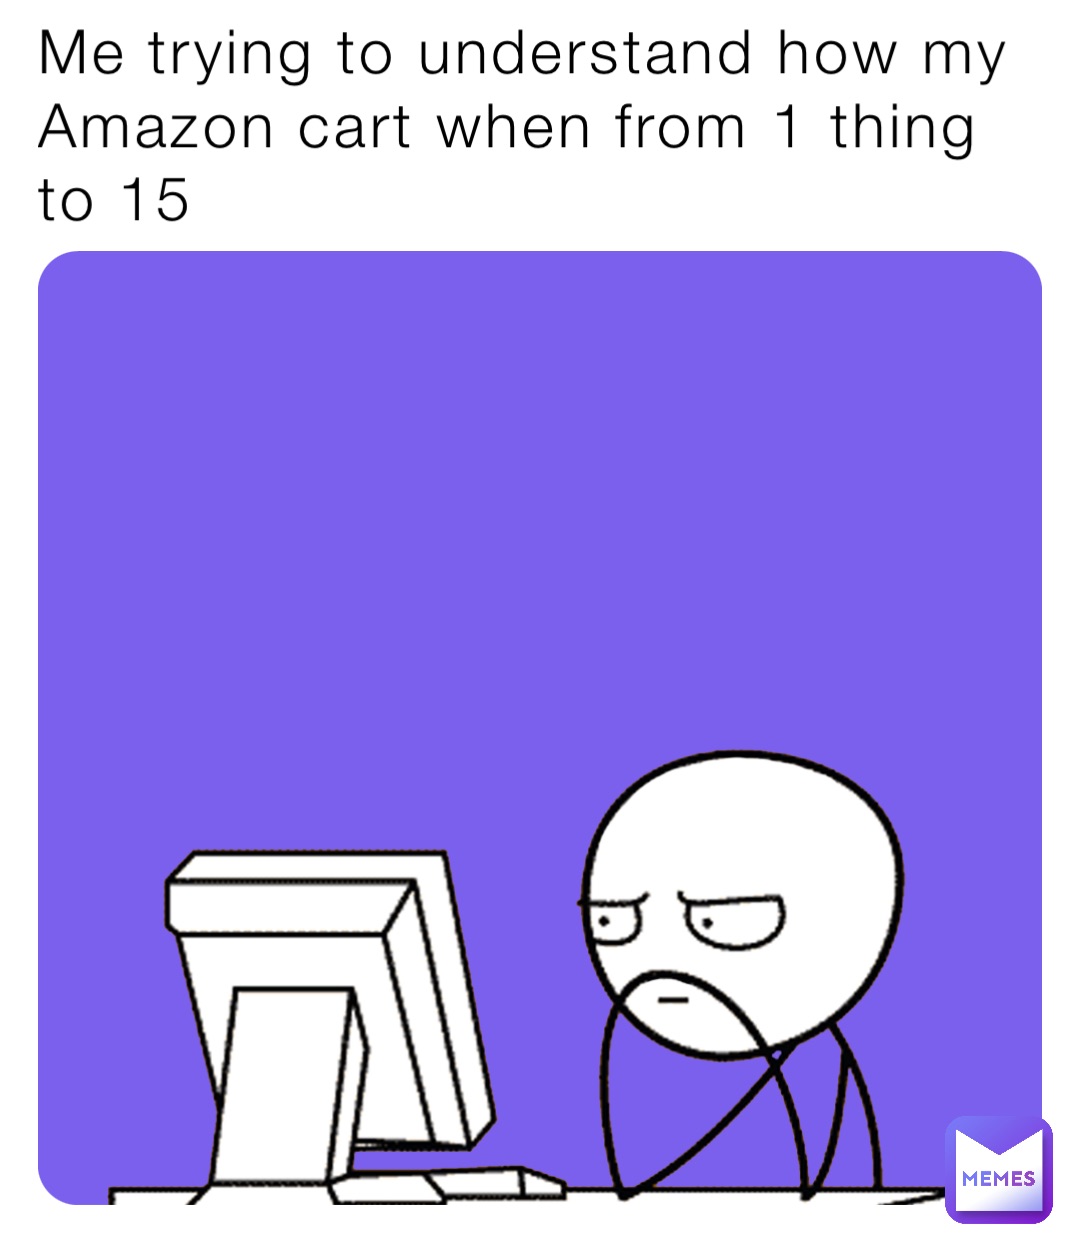 Me trying to understand how my Amazon cart when from 1 thing to 15